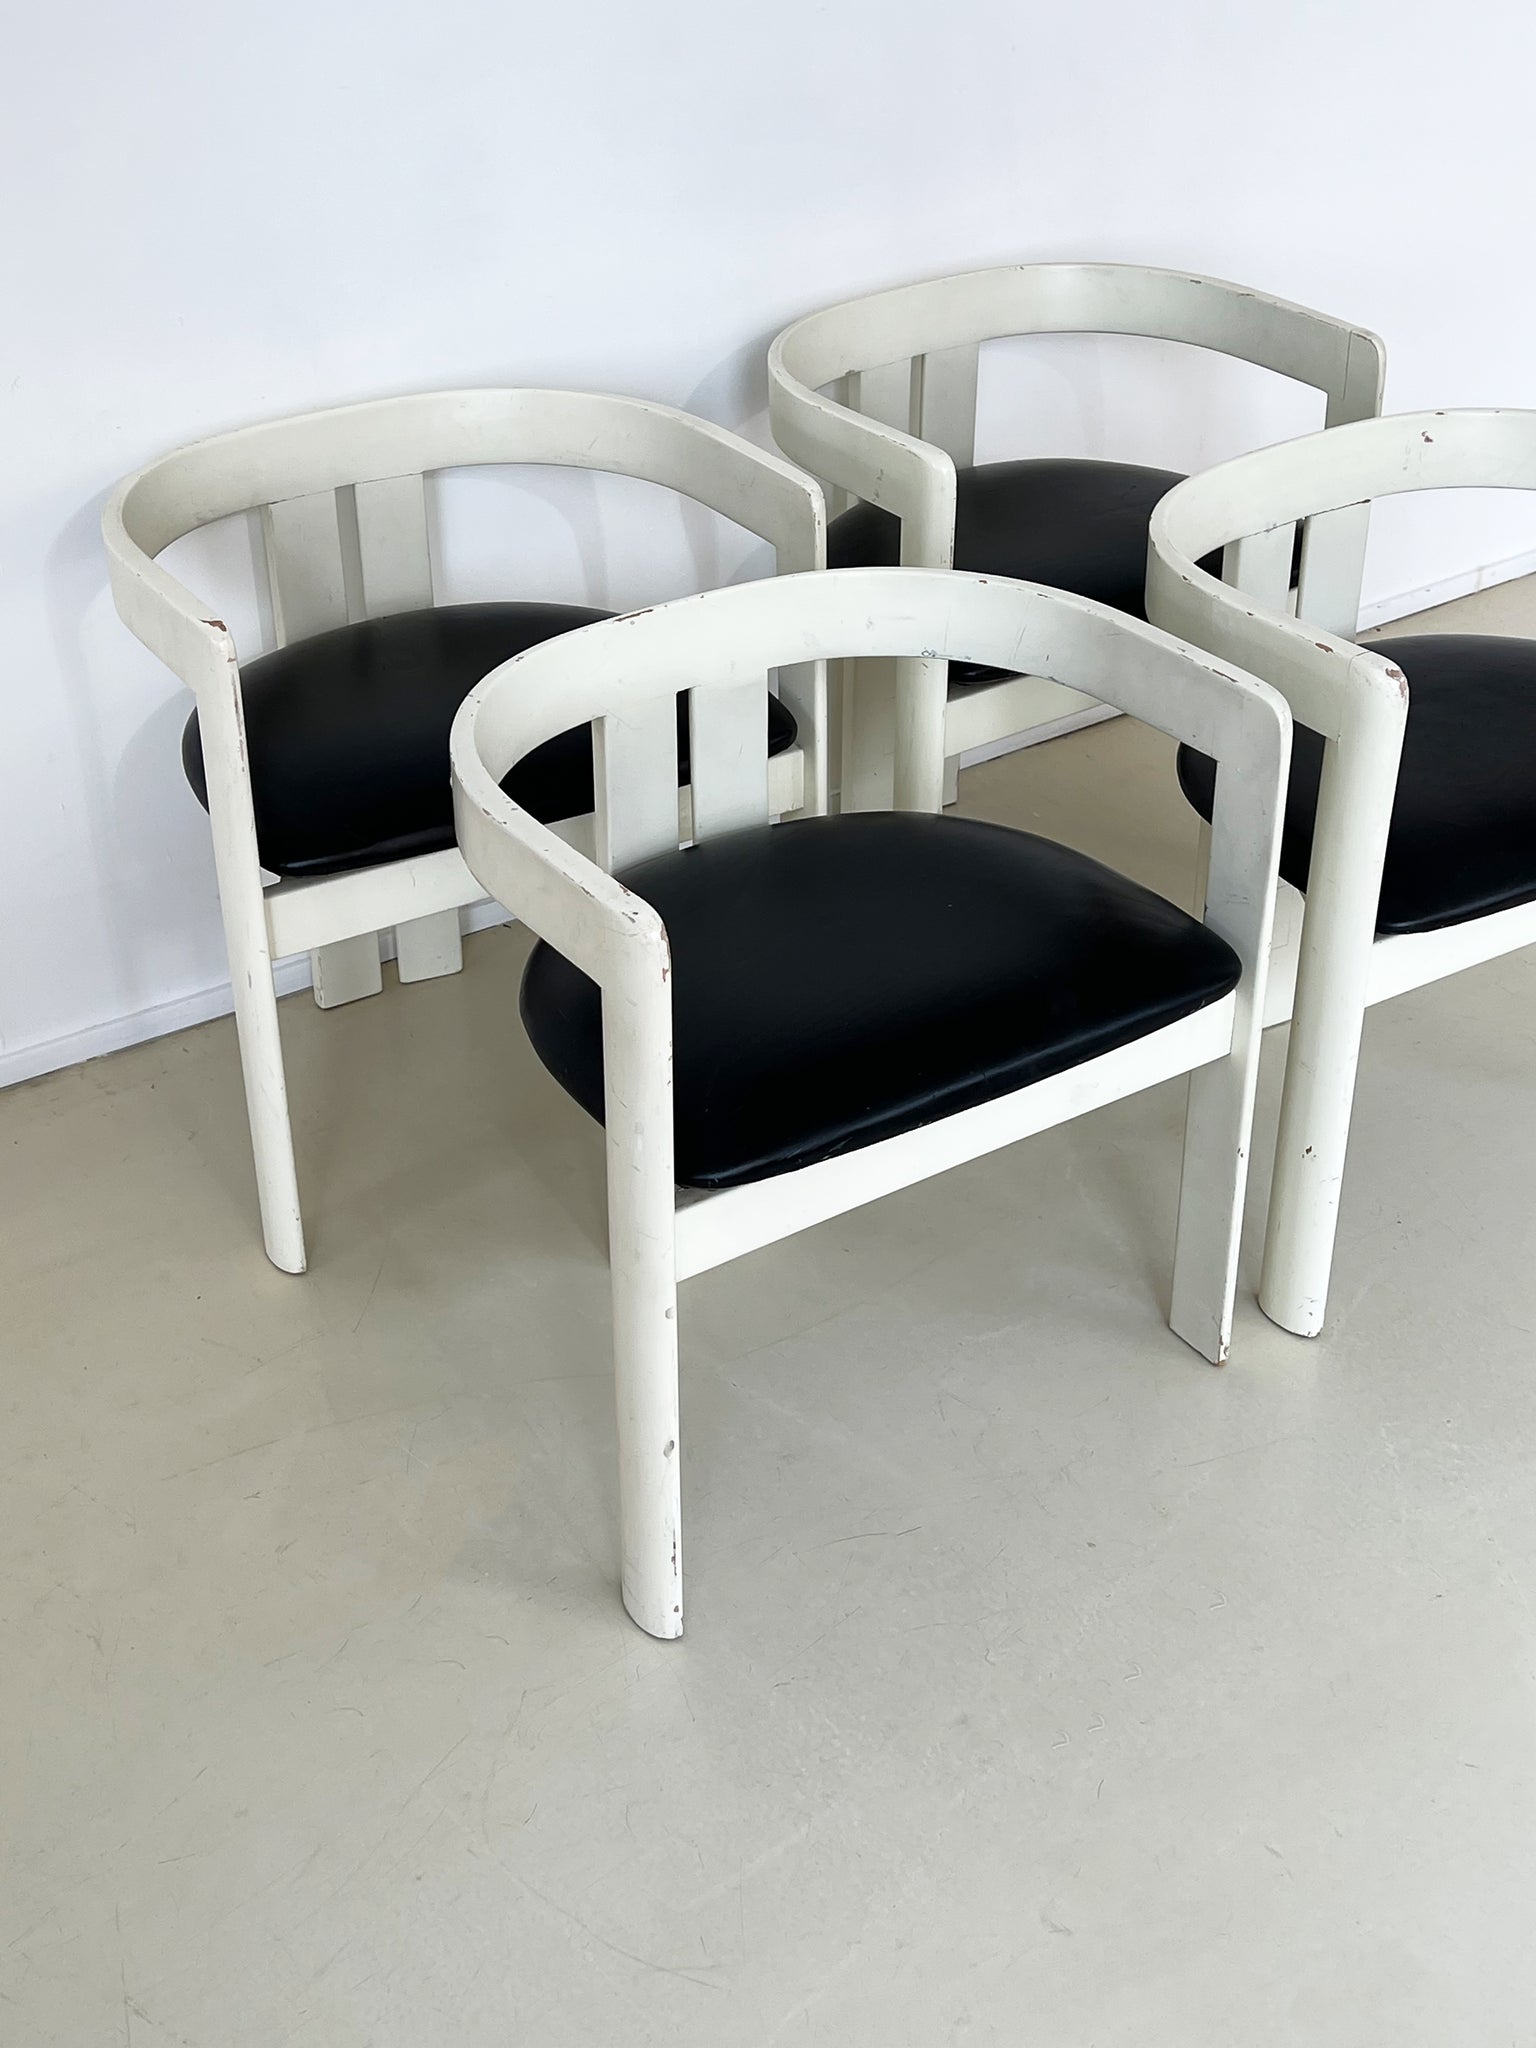 Vintage Set of 4 Pigreco Dining Chairs by Tobia Scarpa